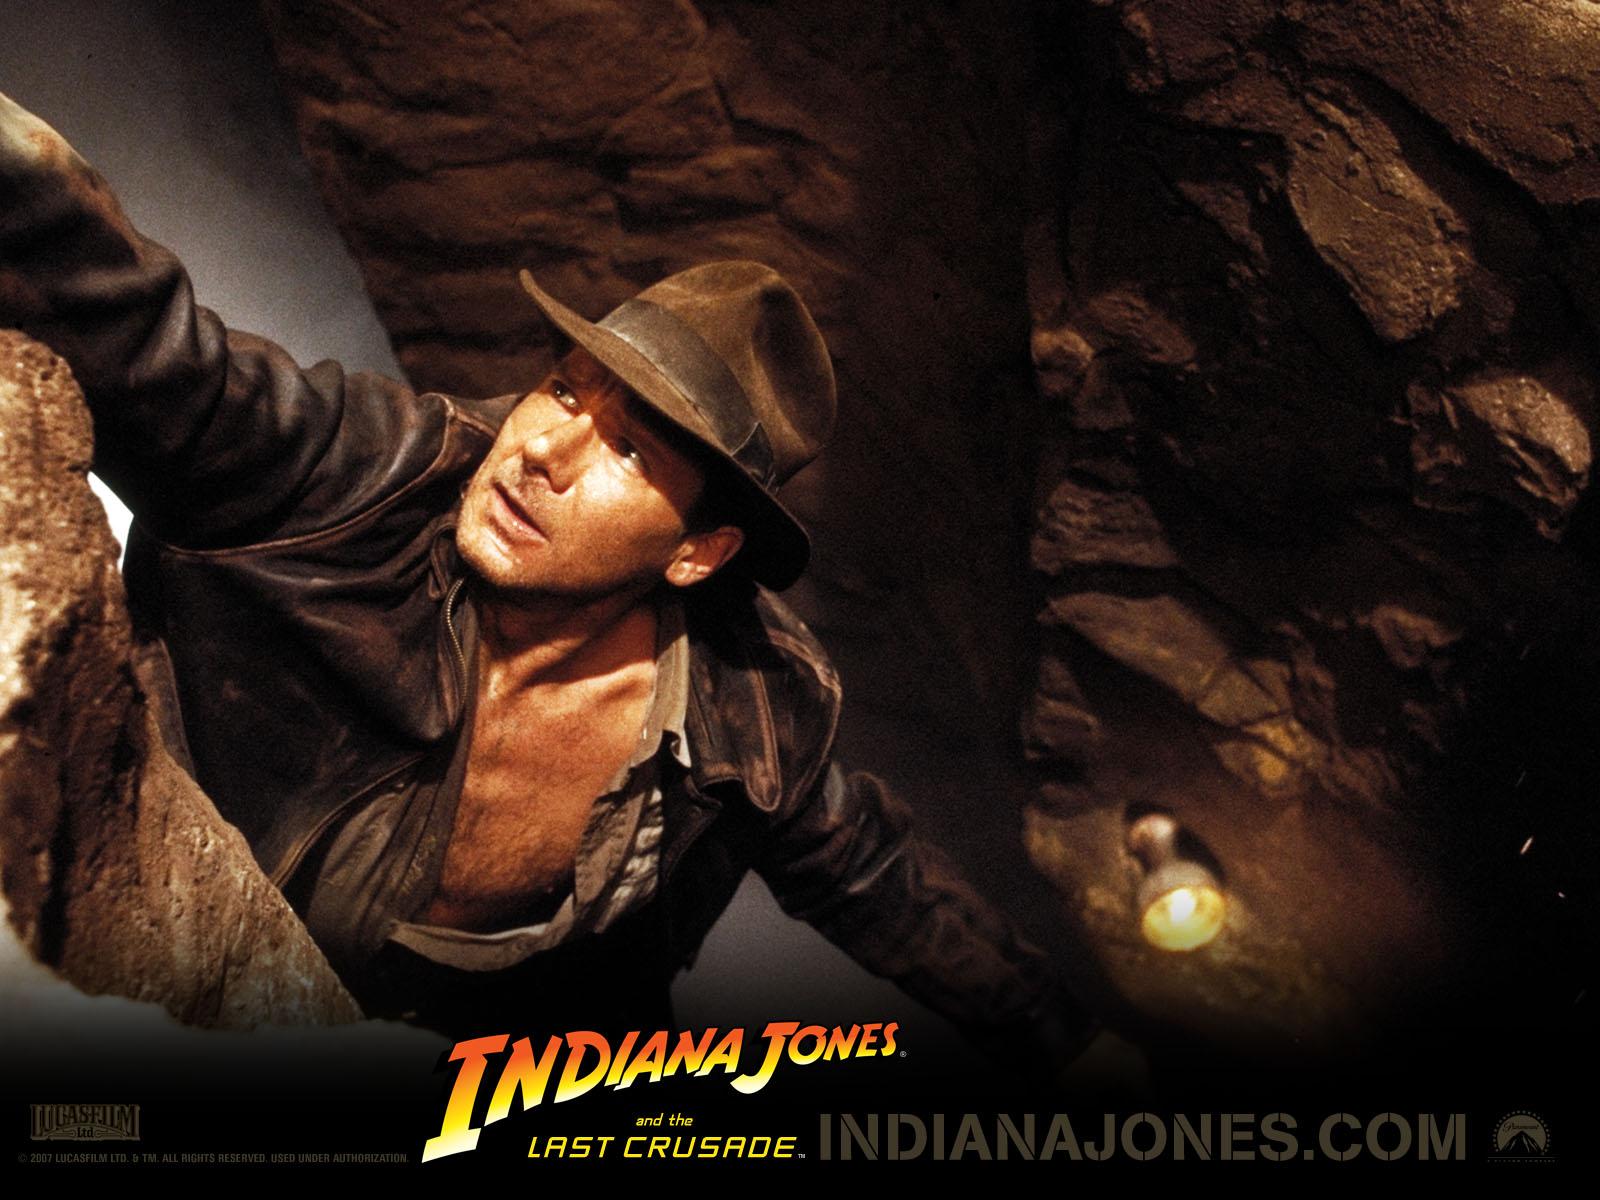 Indiana Jones image The Last Crusade HD wallpaper and background